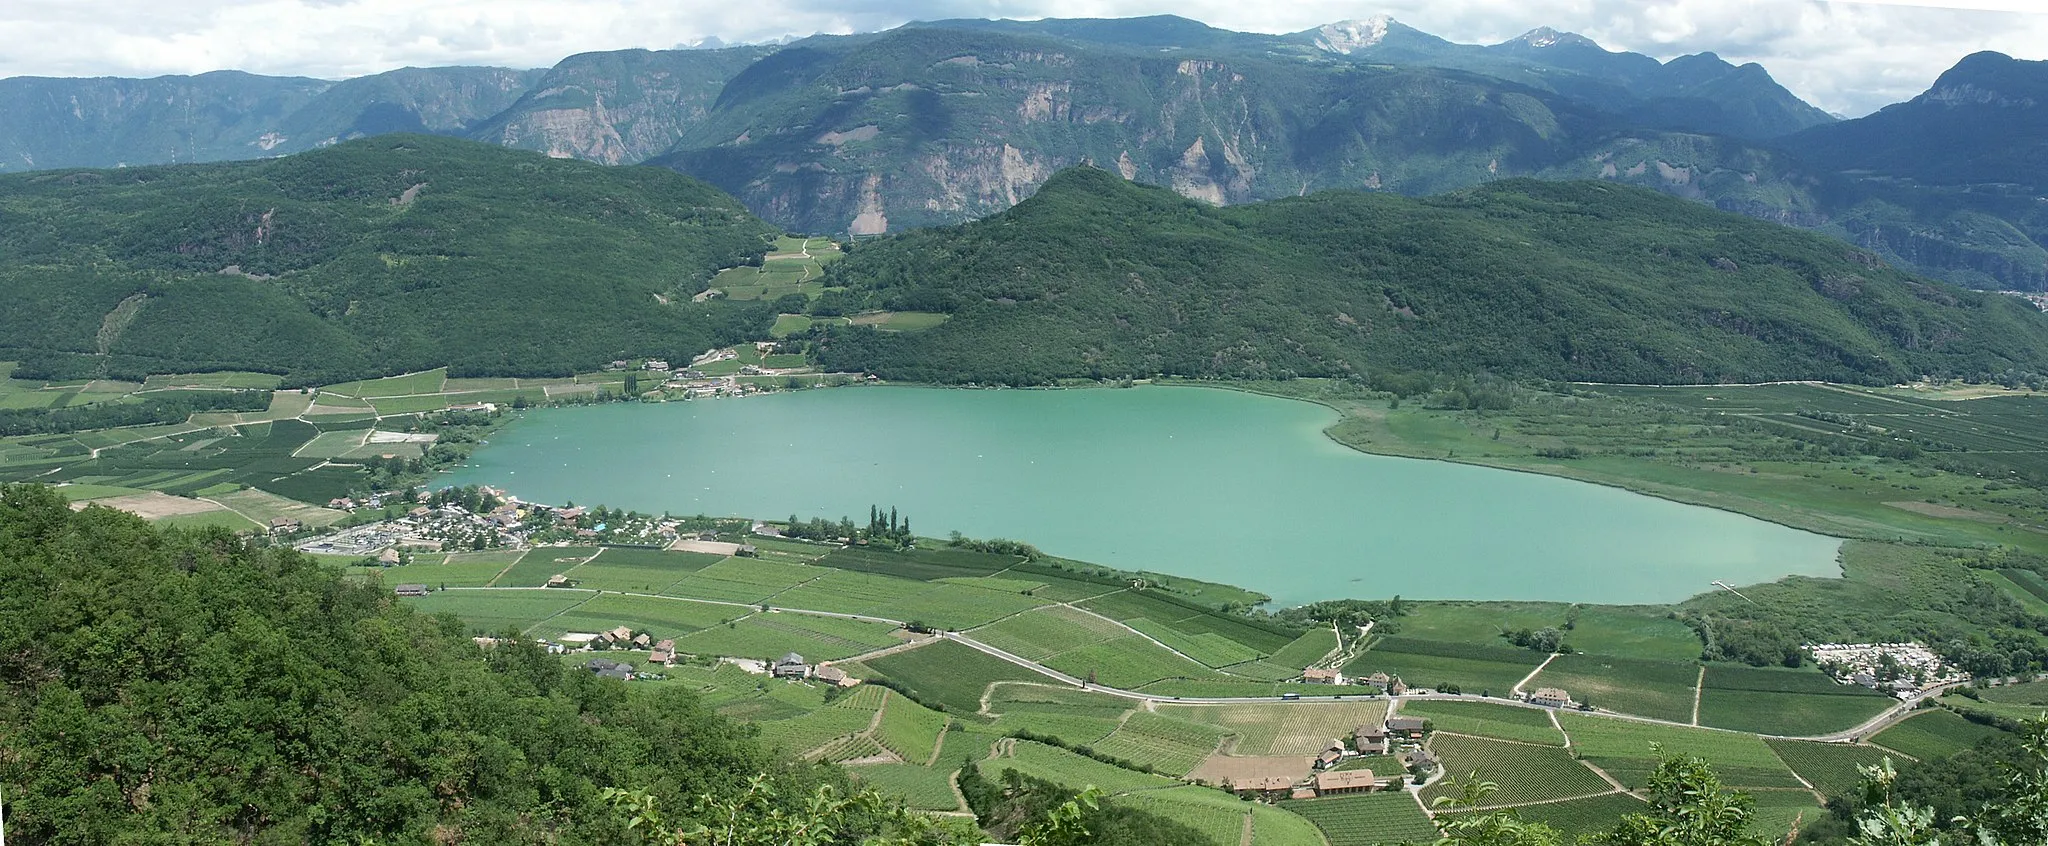 Photo showing: Lake of Kaltern, South Tyrol, Italy - 2 pictures stitched, view from Altenburg